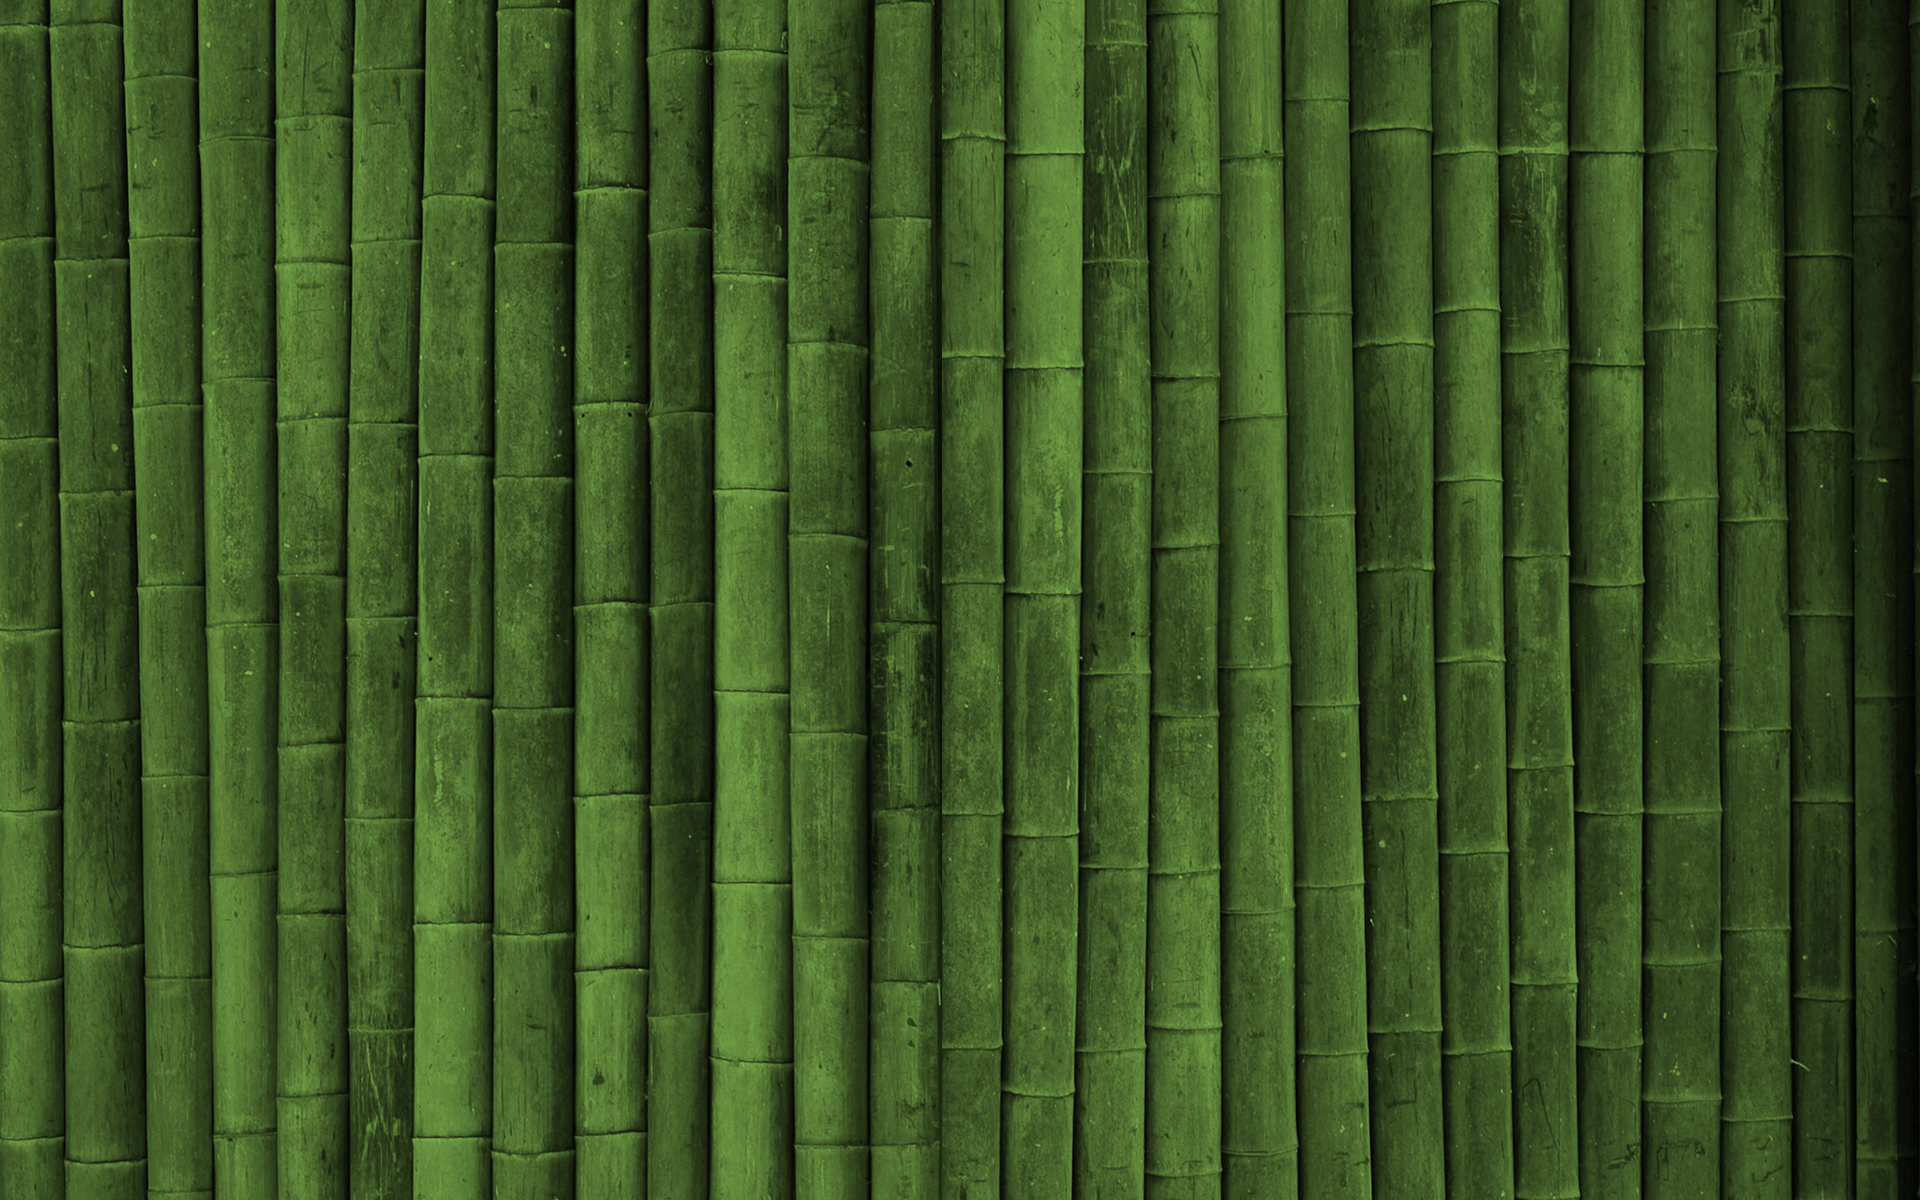 Full HD Wallpapers + Nature, Backgrounds, Bamboos, Green